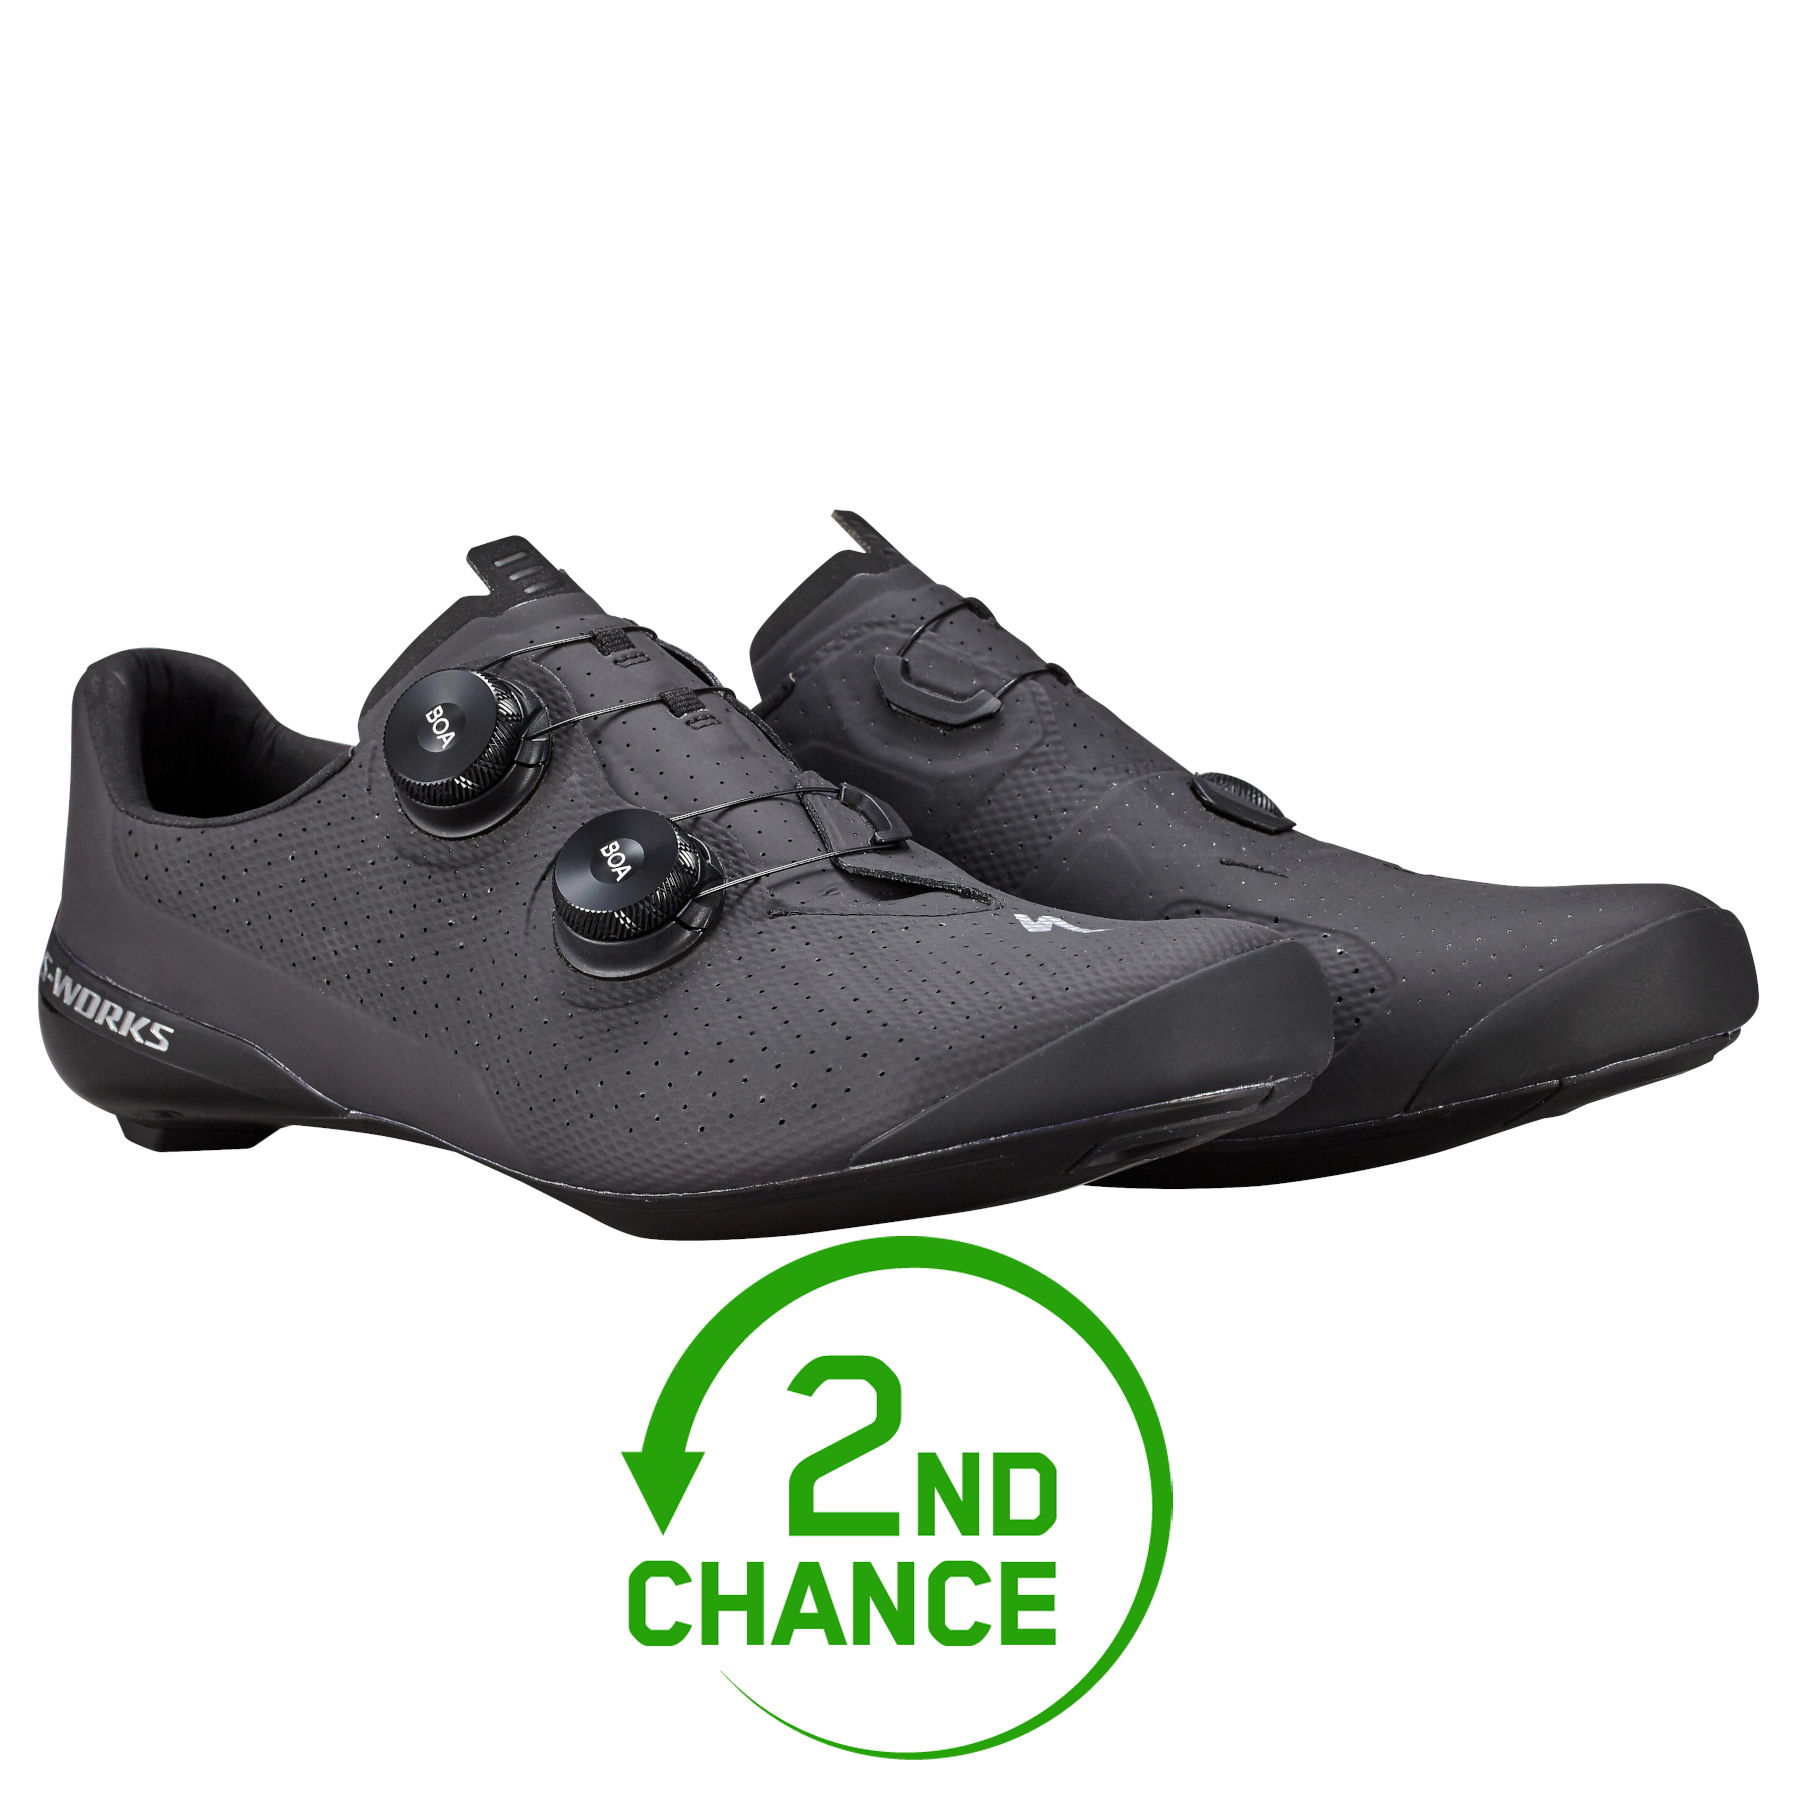 Picture of Specialized S-Works Torch Road Cycling Shoes - Standard | Black - 2nd Choice